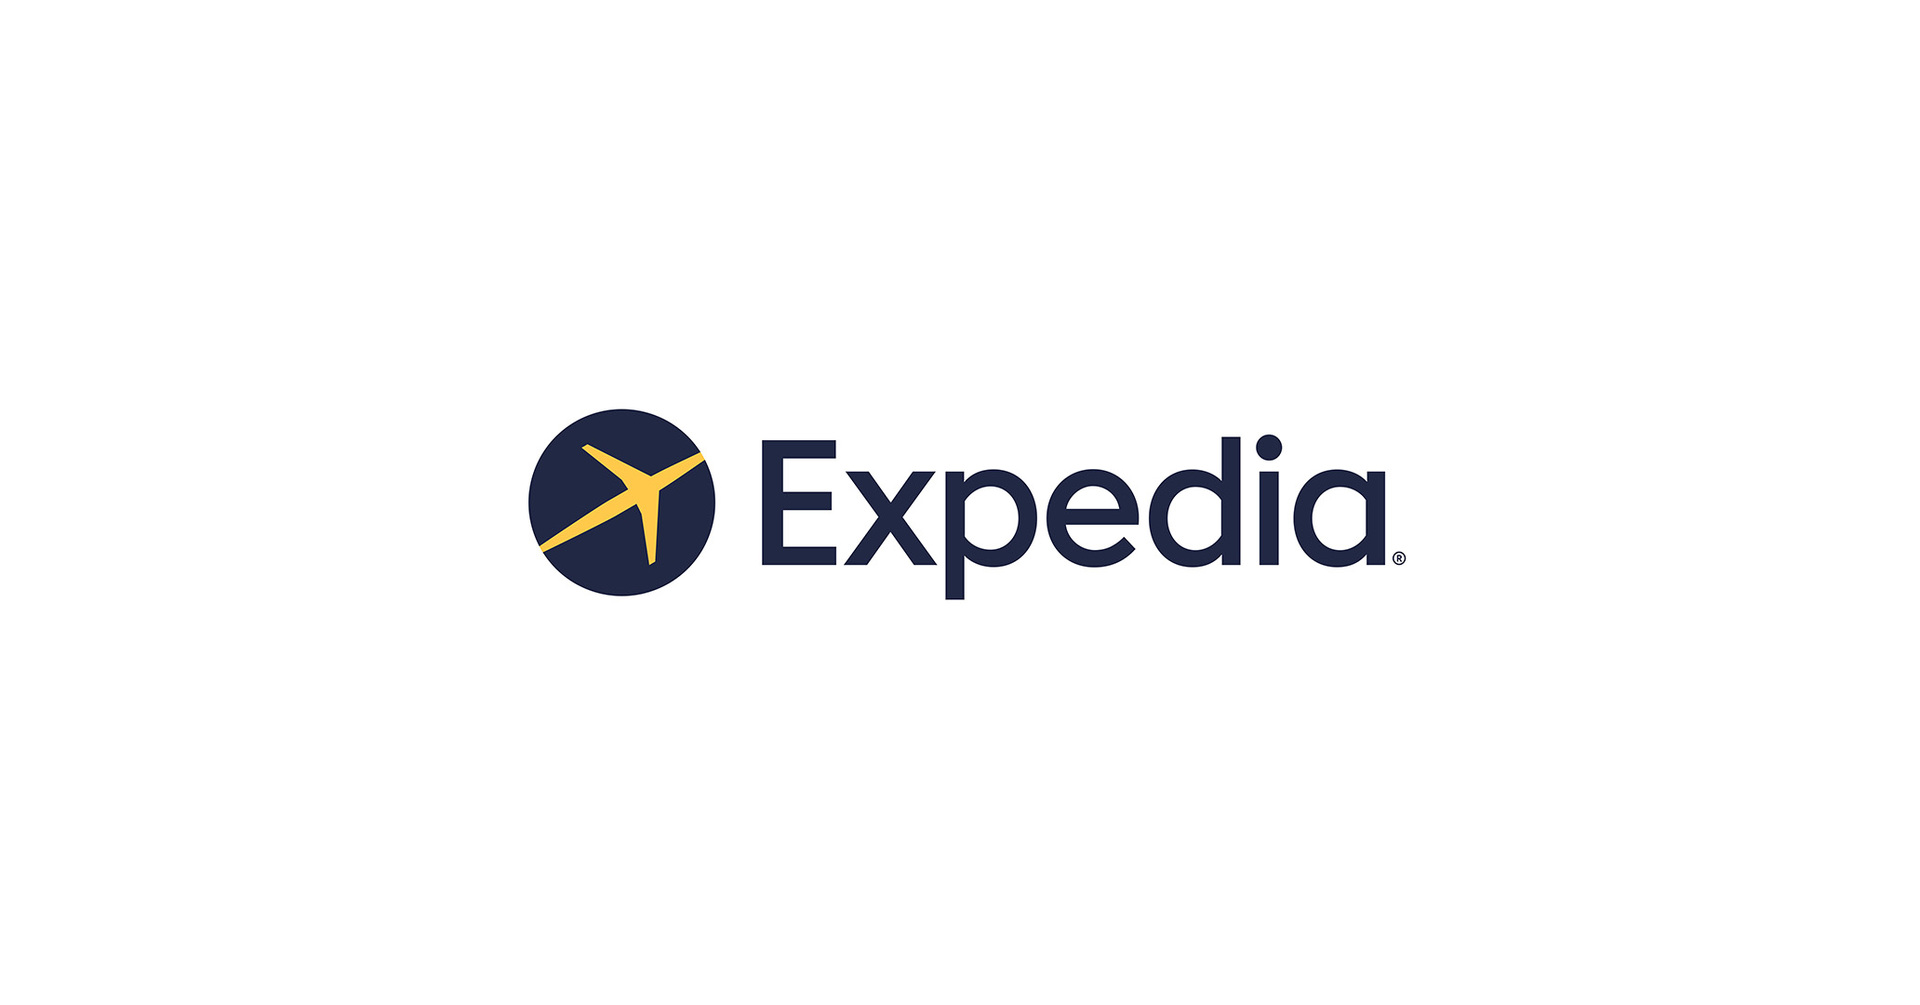 Expedia deals engine taps into user patterns for Last-Minute Deals